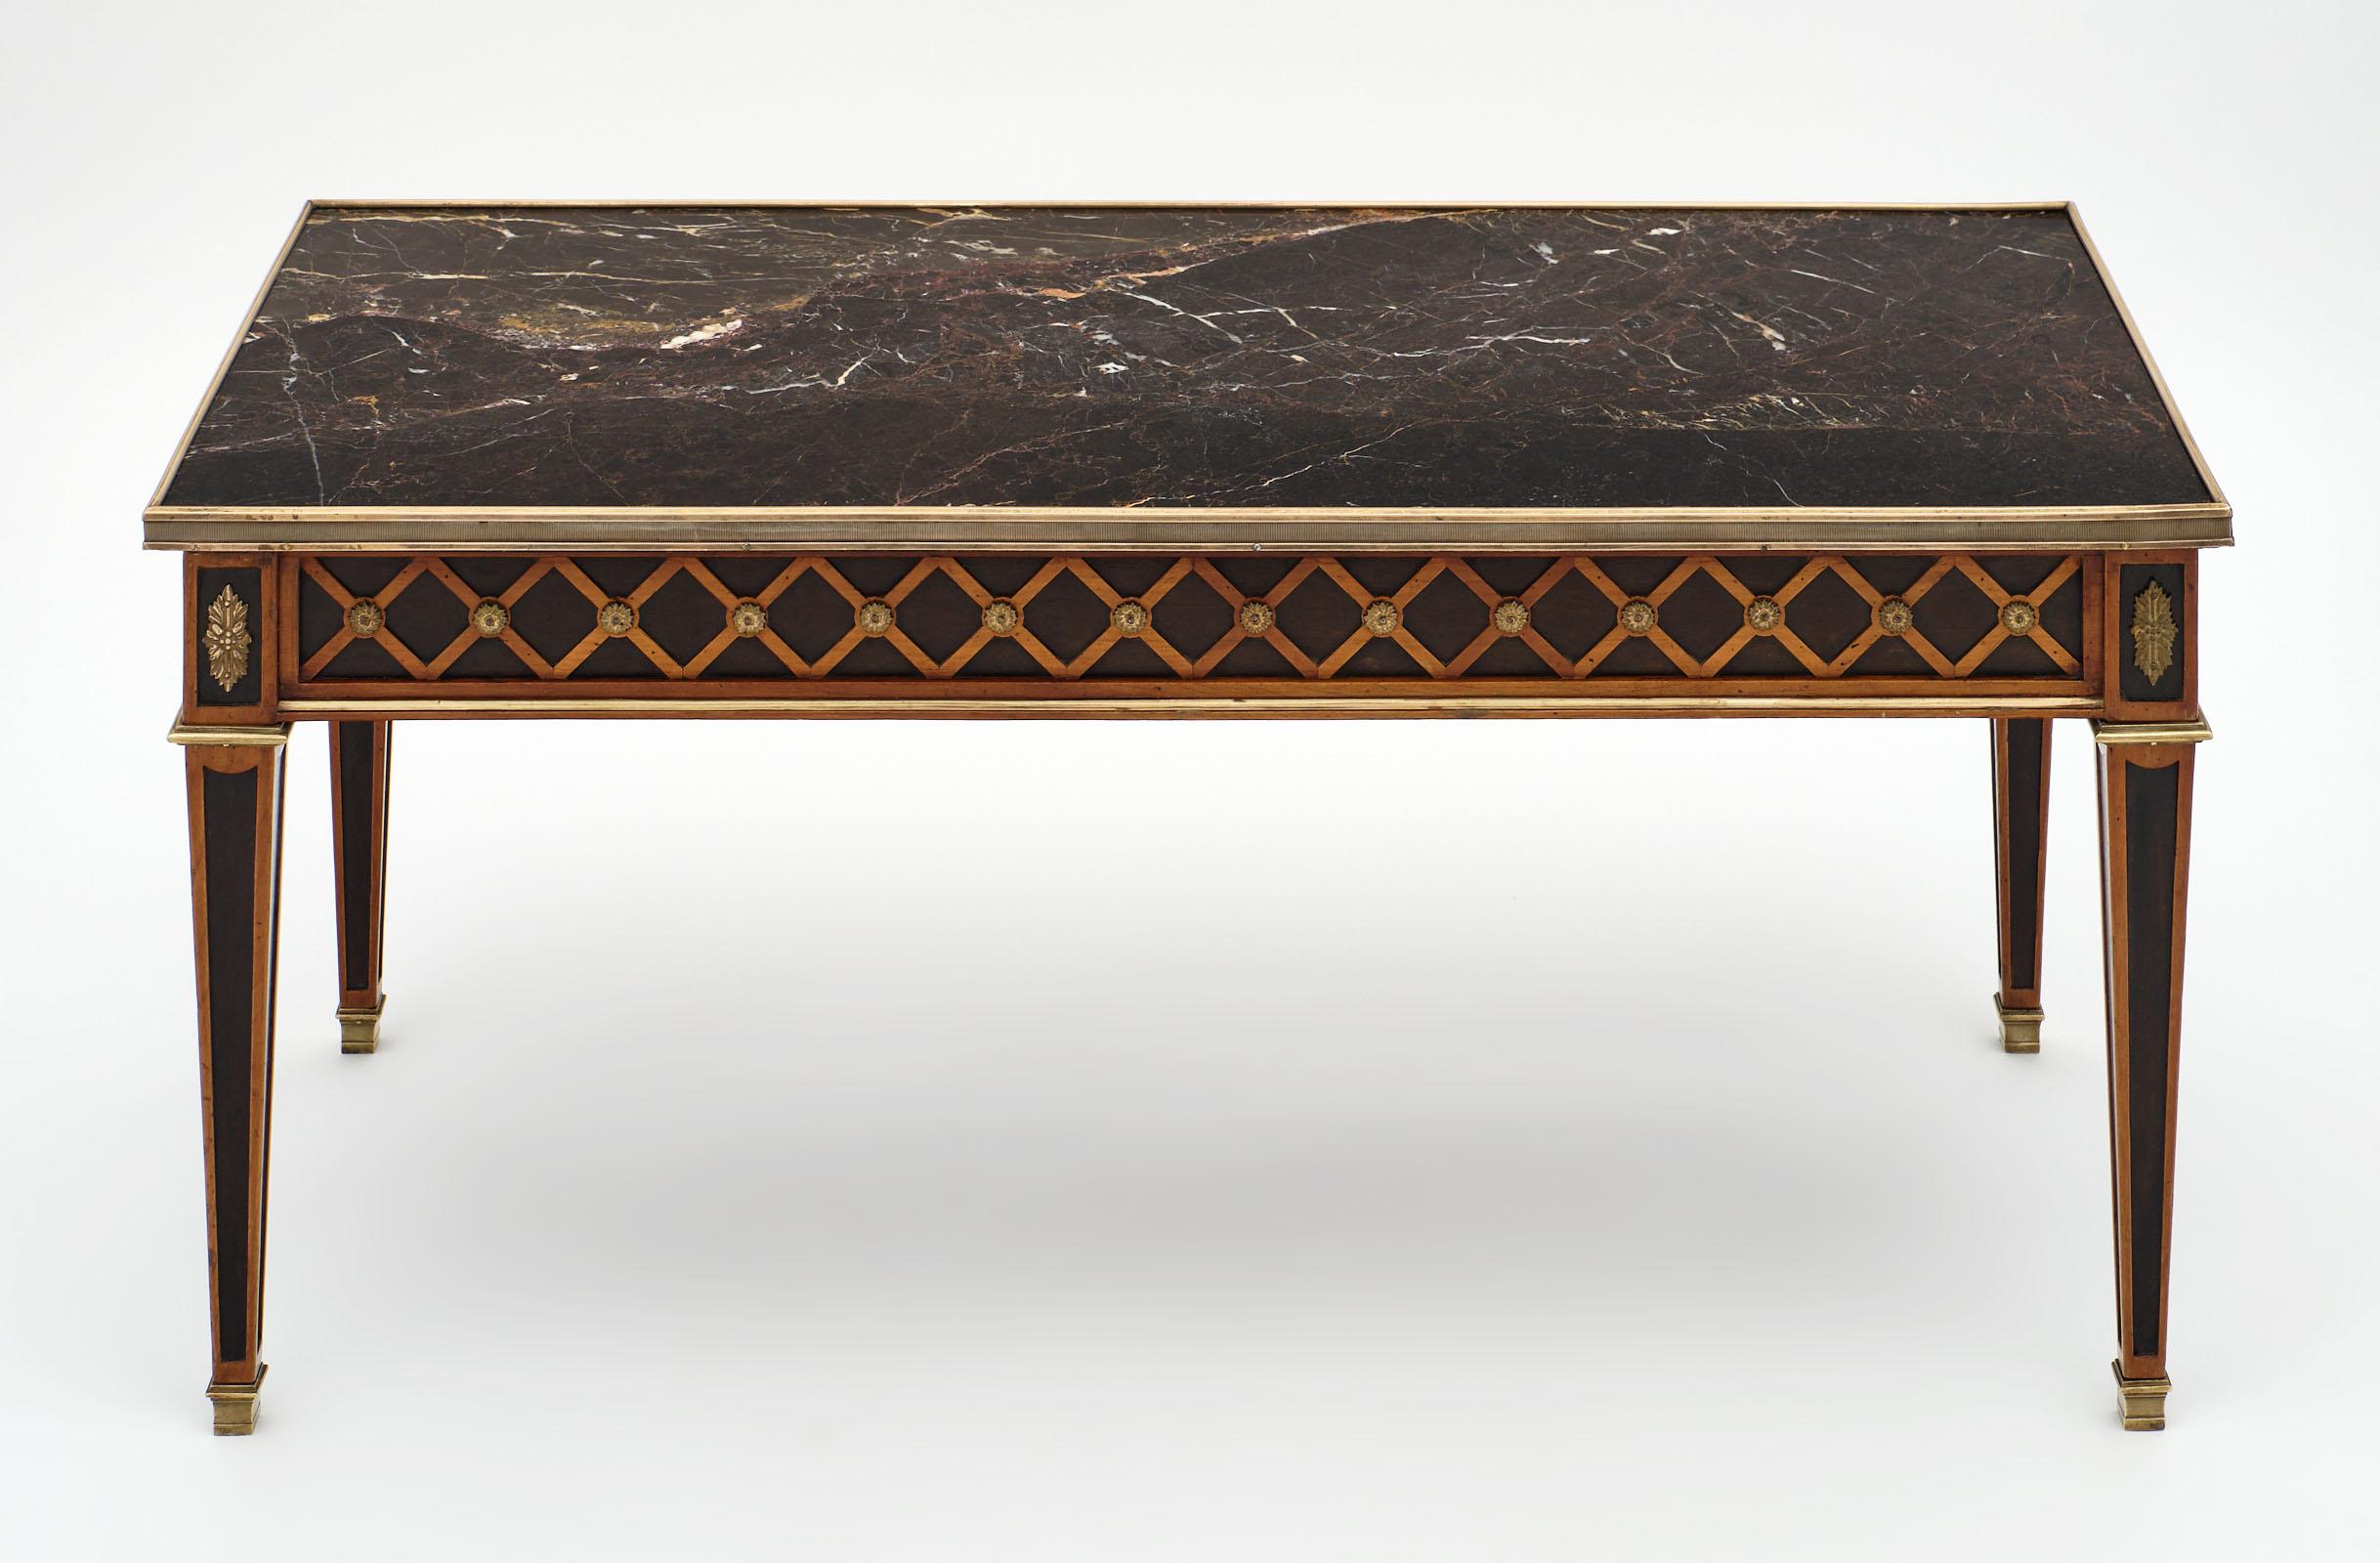 French Louis XVI style marble-topped coffee table made of solid cherrywood and topped with a “portoro” intact marble slab. The gilt brass trim and rosace add beautiful detail throughout. We loved the neoclassical frieze and the finesse of the cast